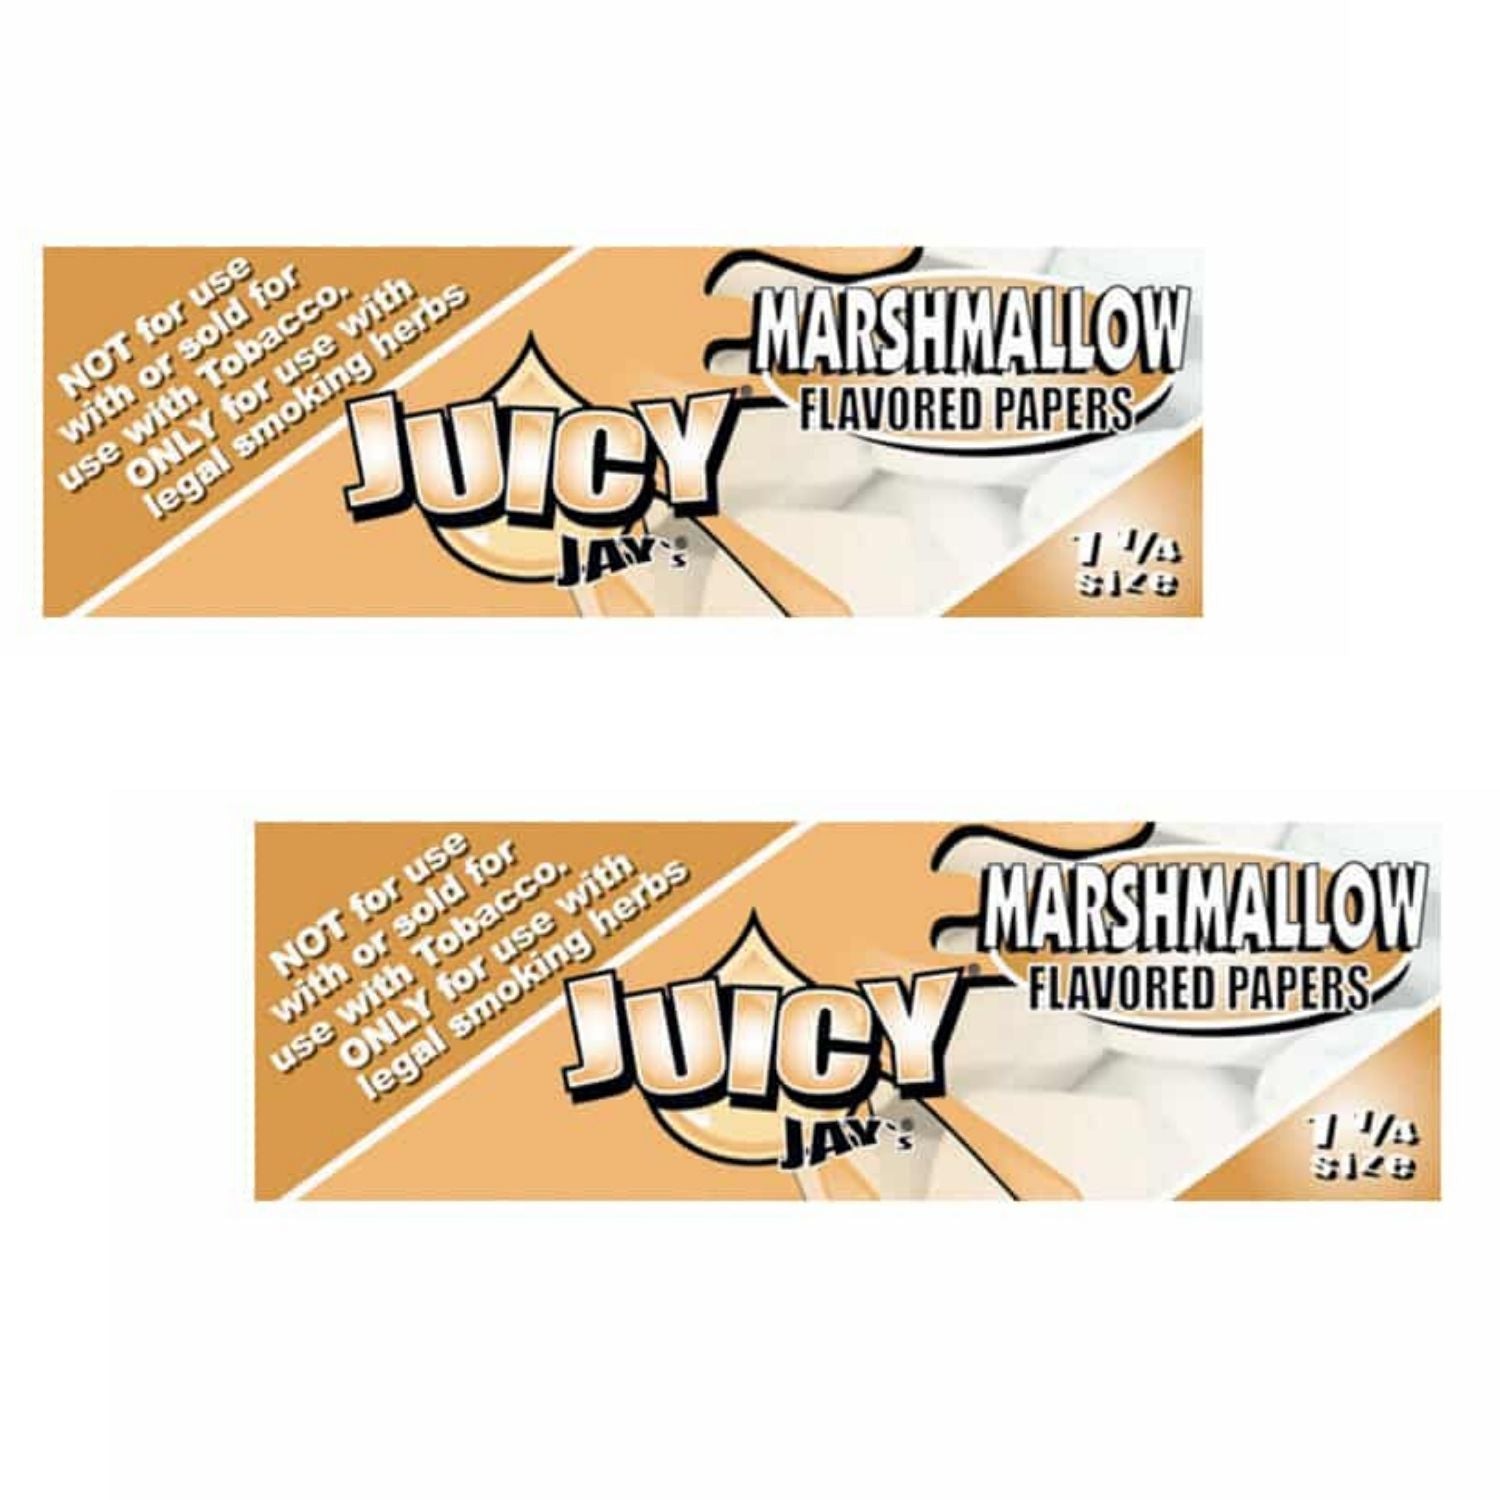 Juicy Jay Rolling Papers - Marshmallow Flavor - 1 1/4 Size